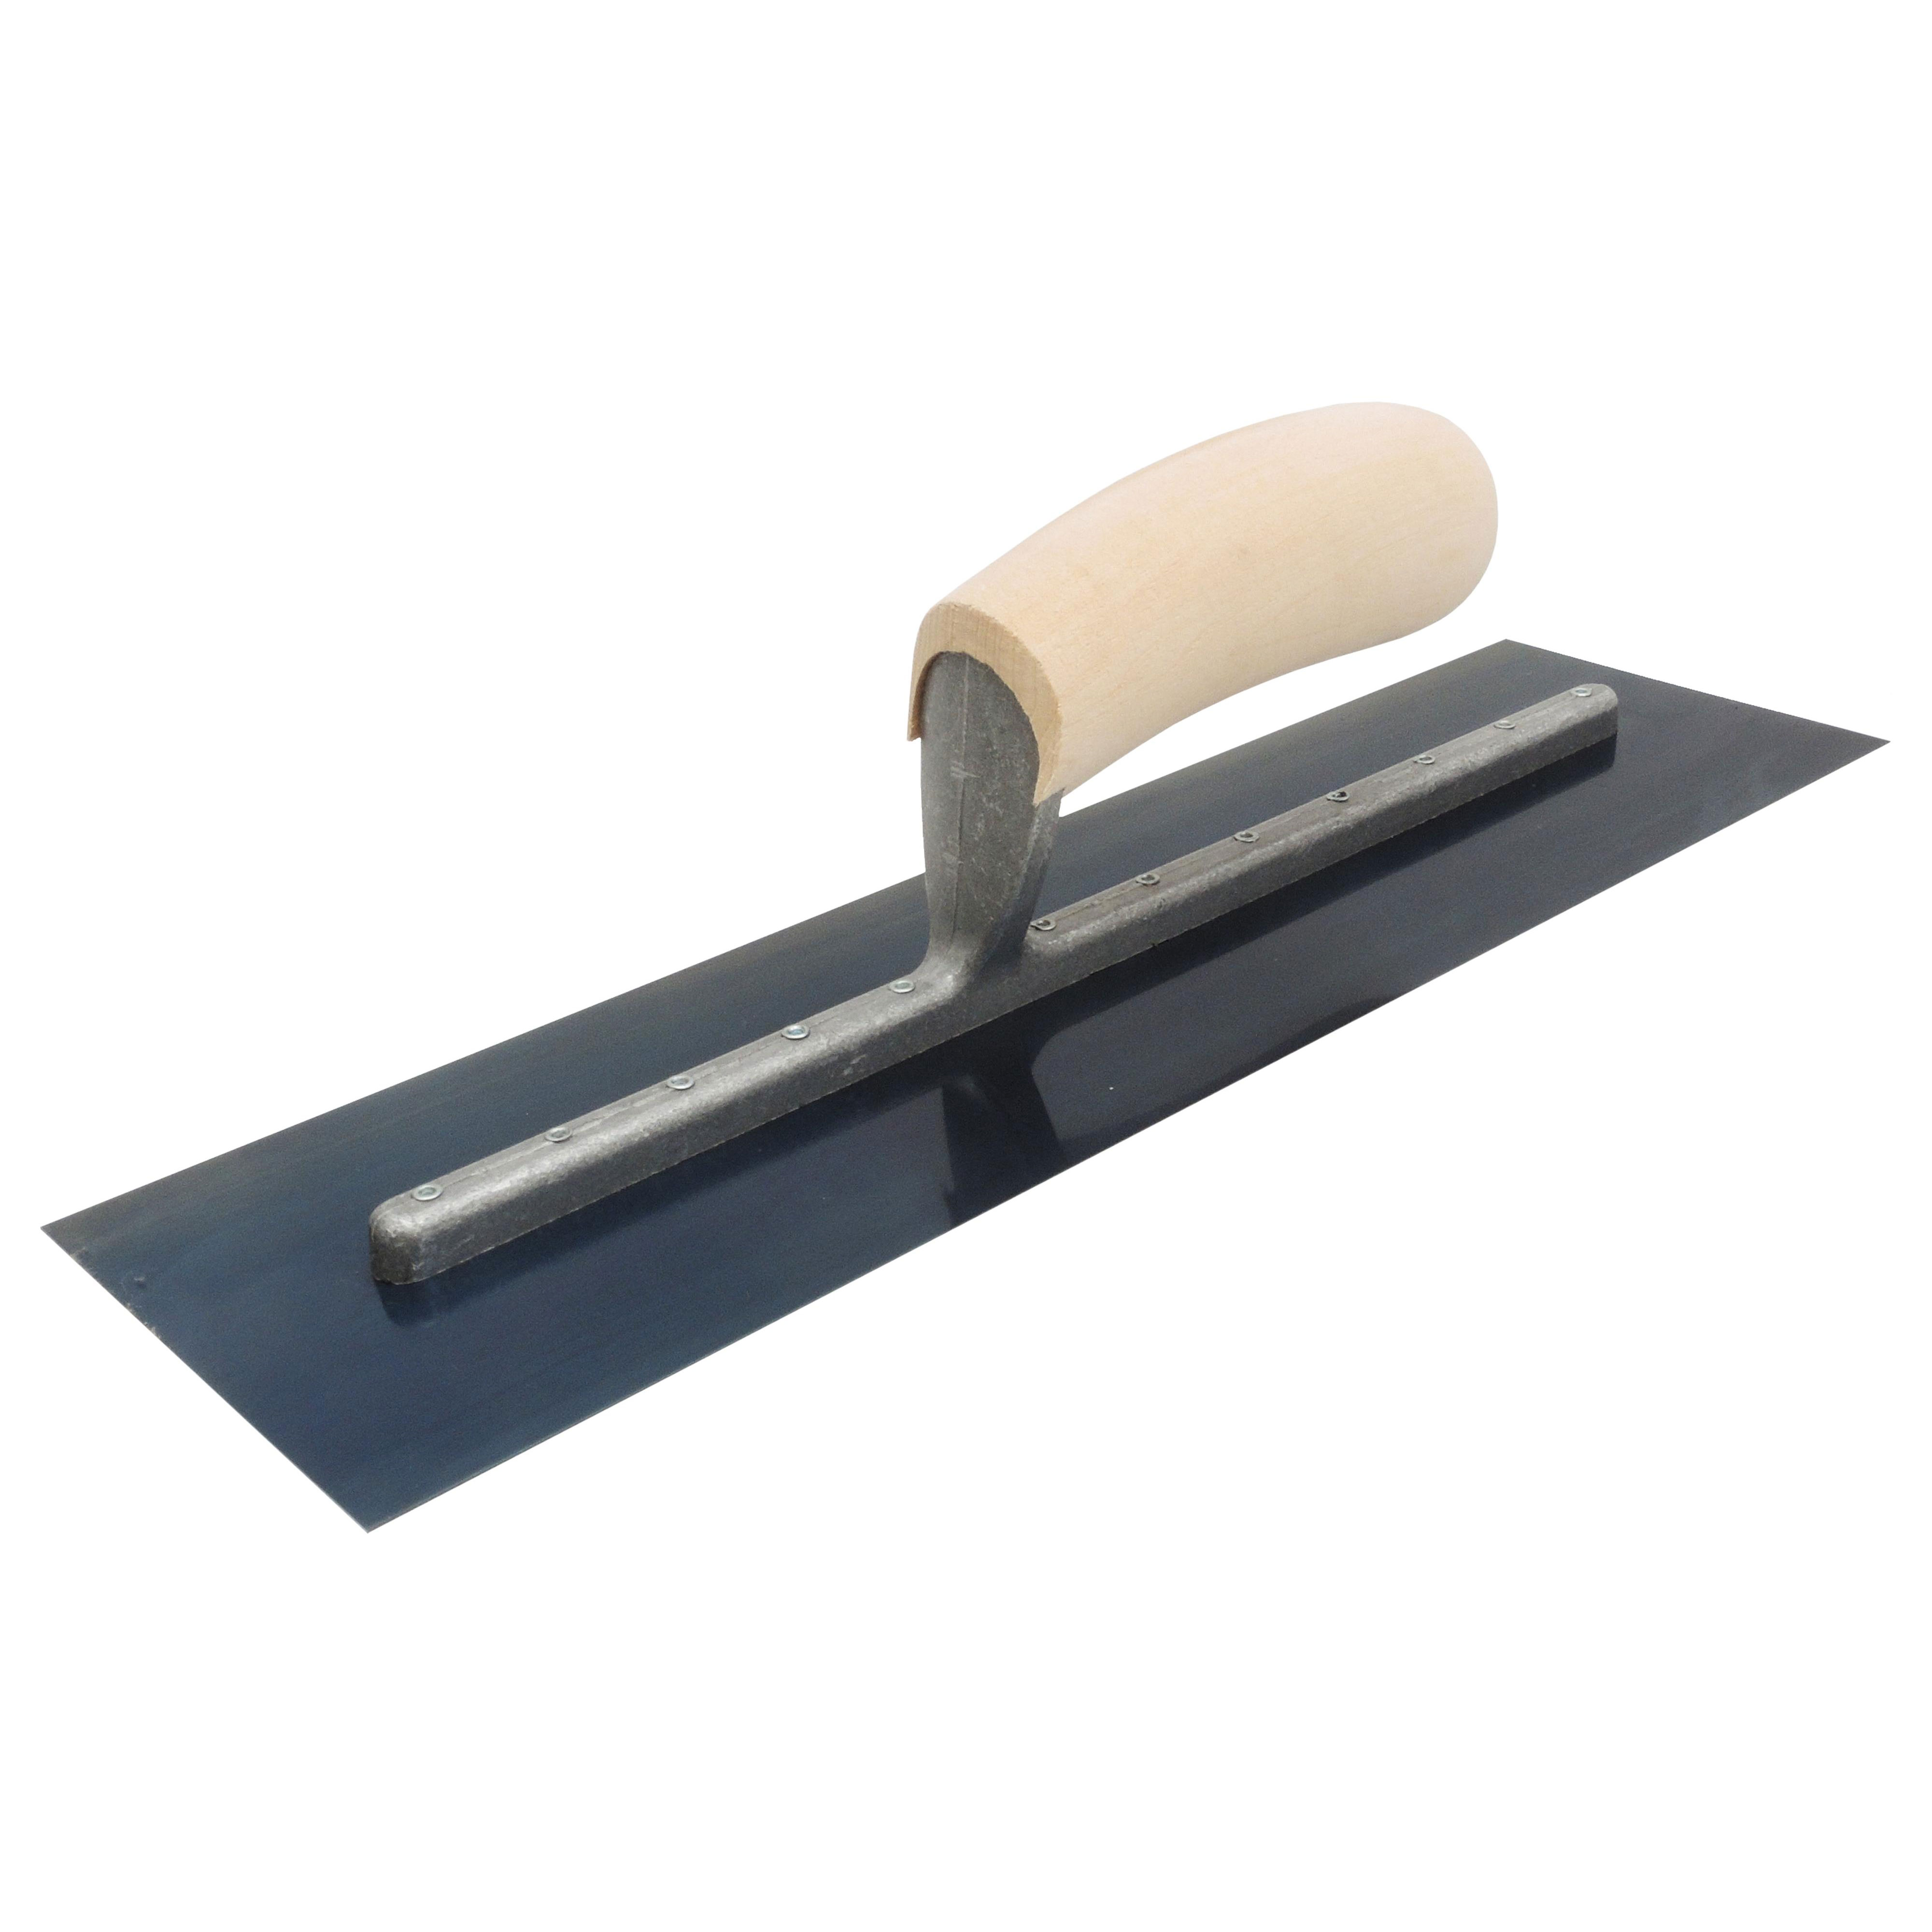 Marshalltown FT165B 16in x 5in Blue Steel Finishing Trowel with Wood Handle FT165B